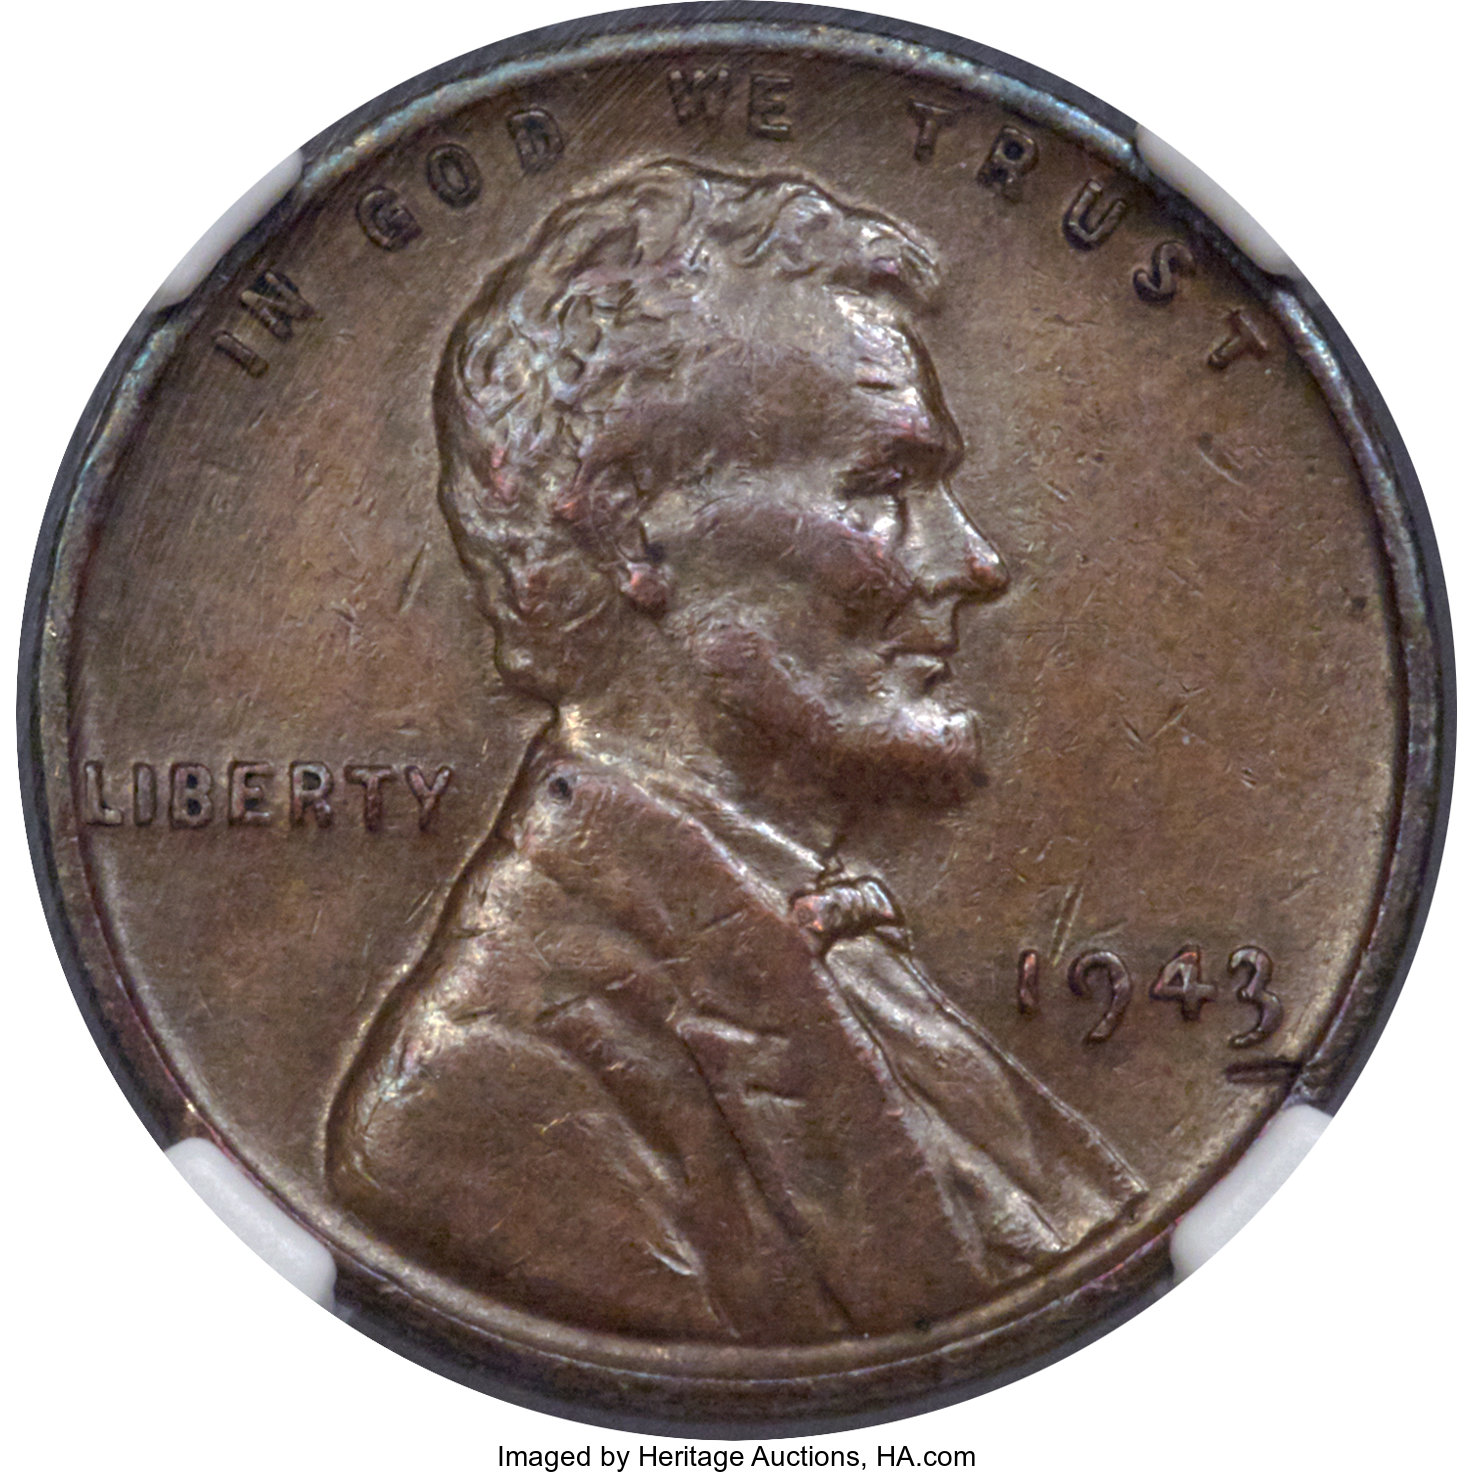 enlarged image for The Mystique of the 1943 Bronze Cent Spans Time